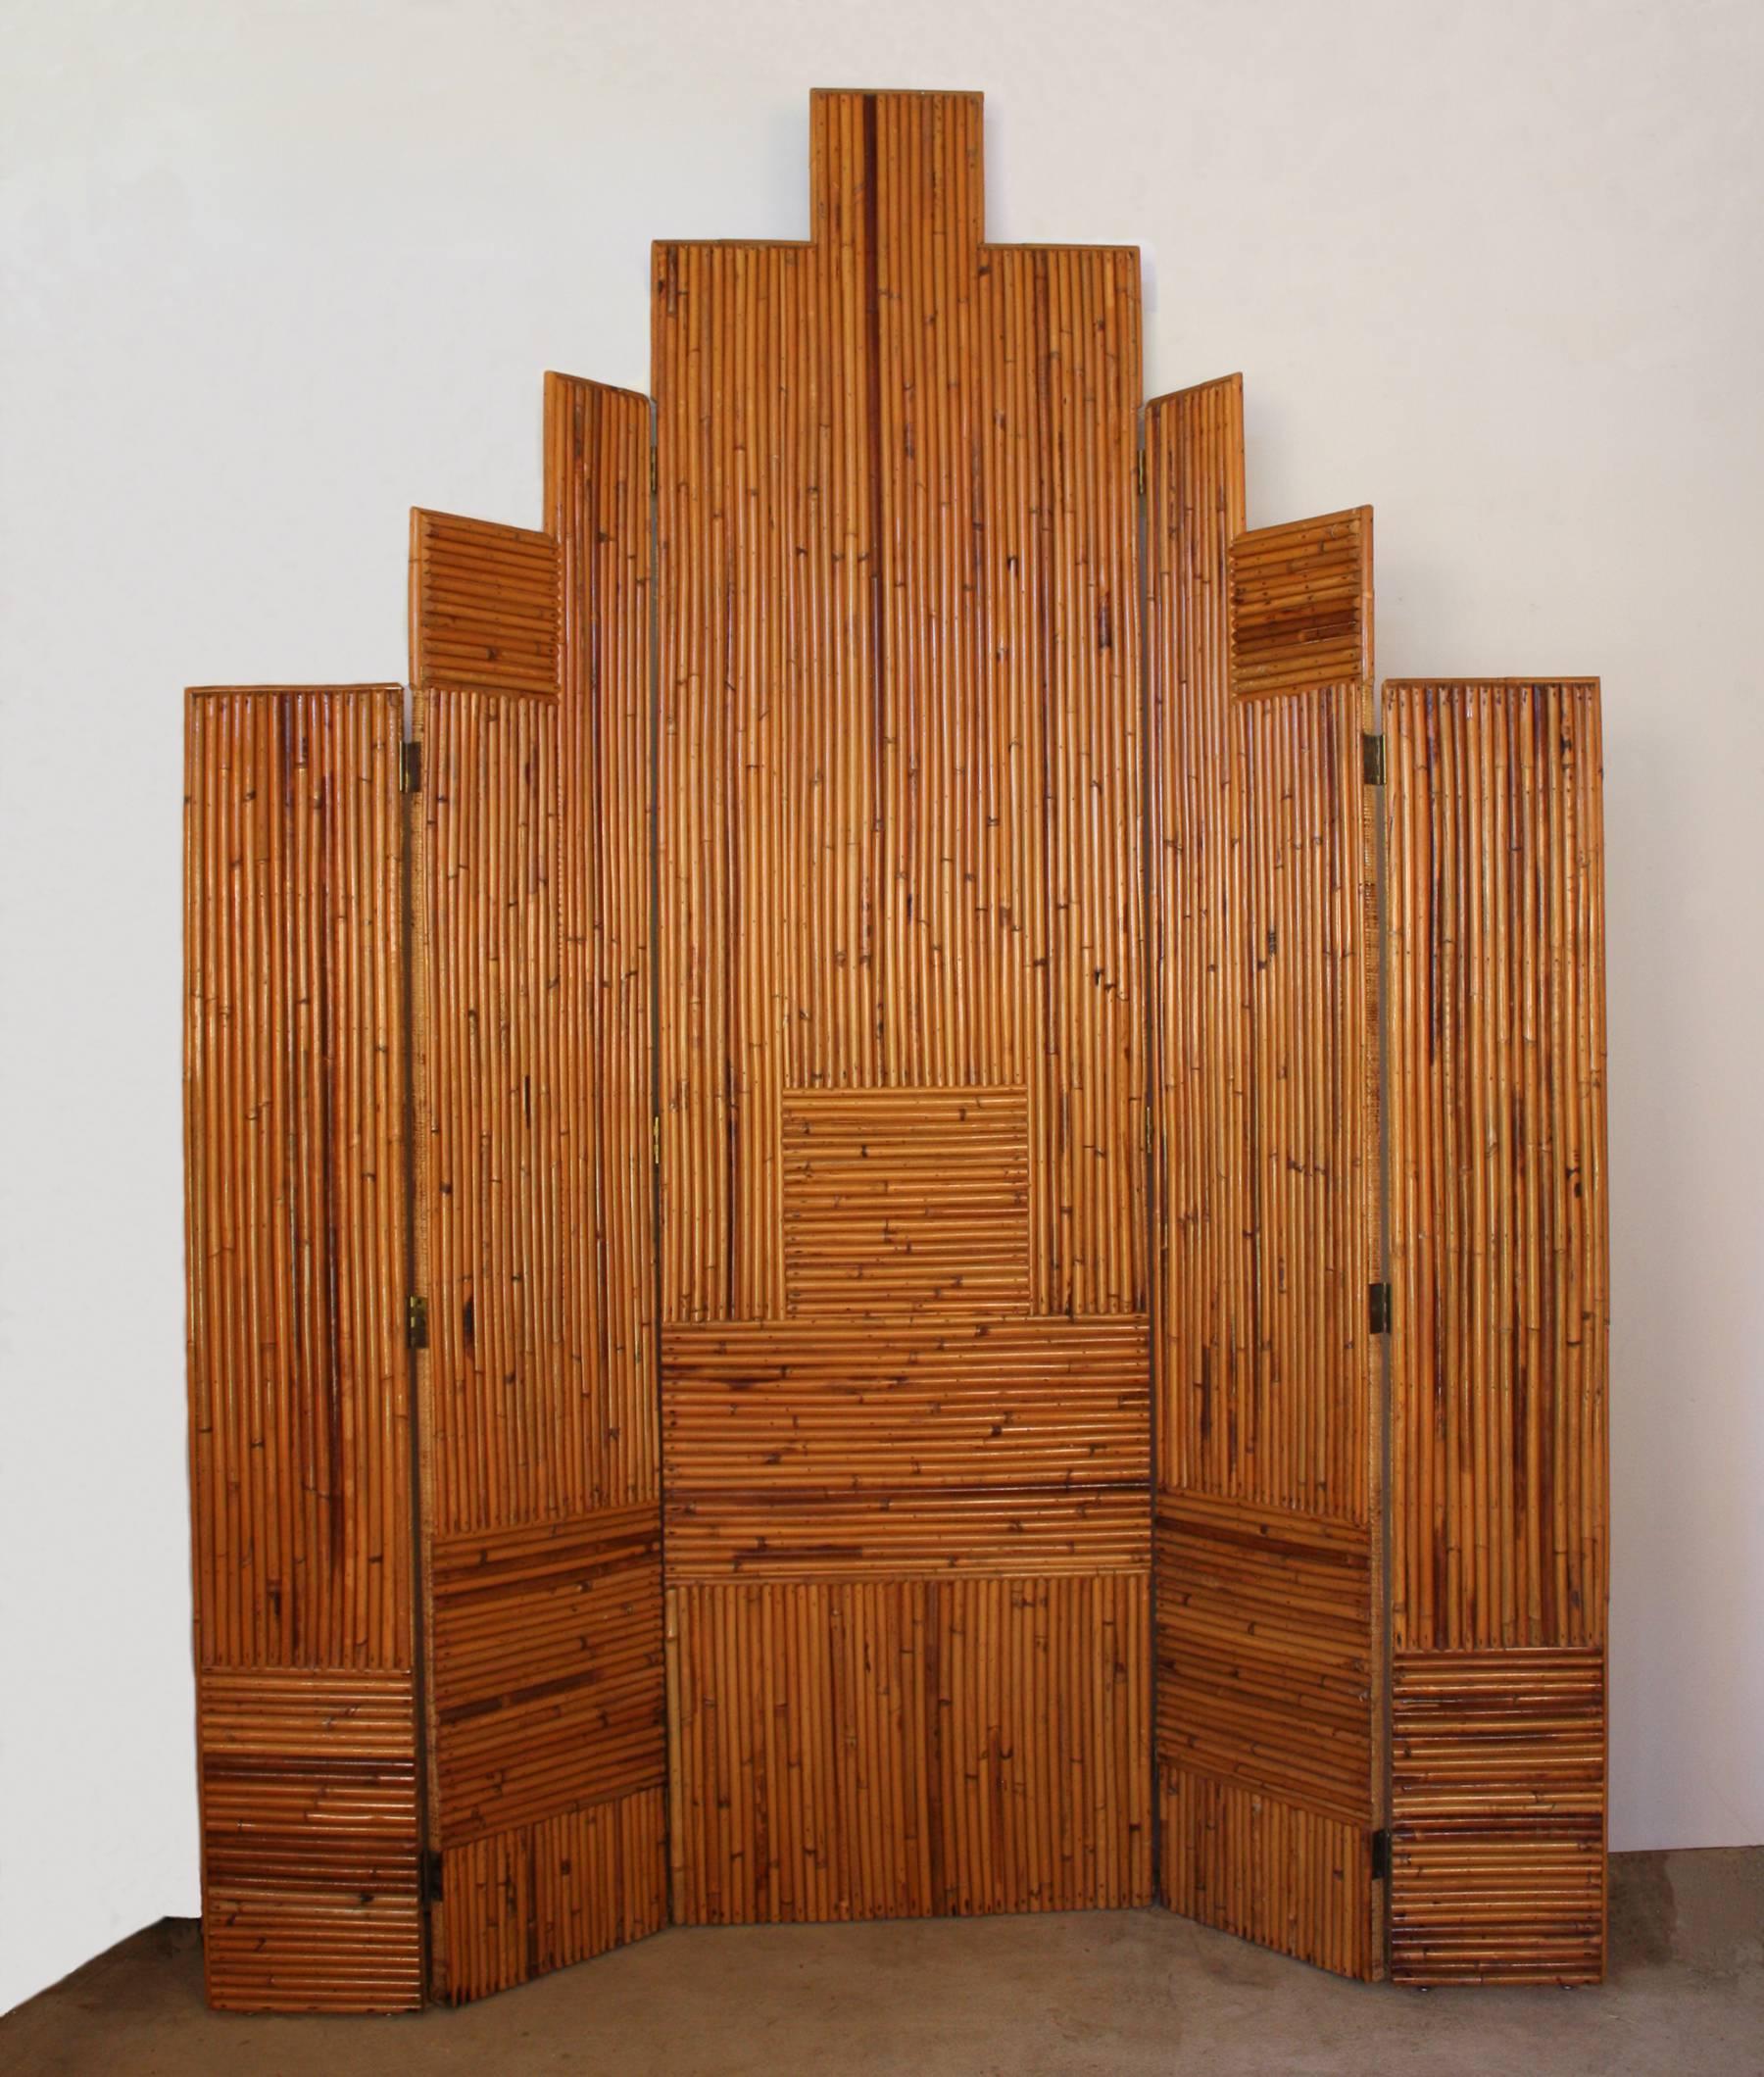 An Art Deco five-panel screen or room divider with split bamboo reeds on one side and woven natural fiber on the reverse side. The screen is constructed of sturdy 3/4-inch wood panels that, together, resemble a city skyline. circa 1960.